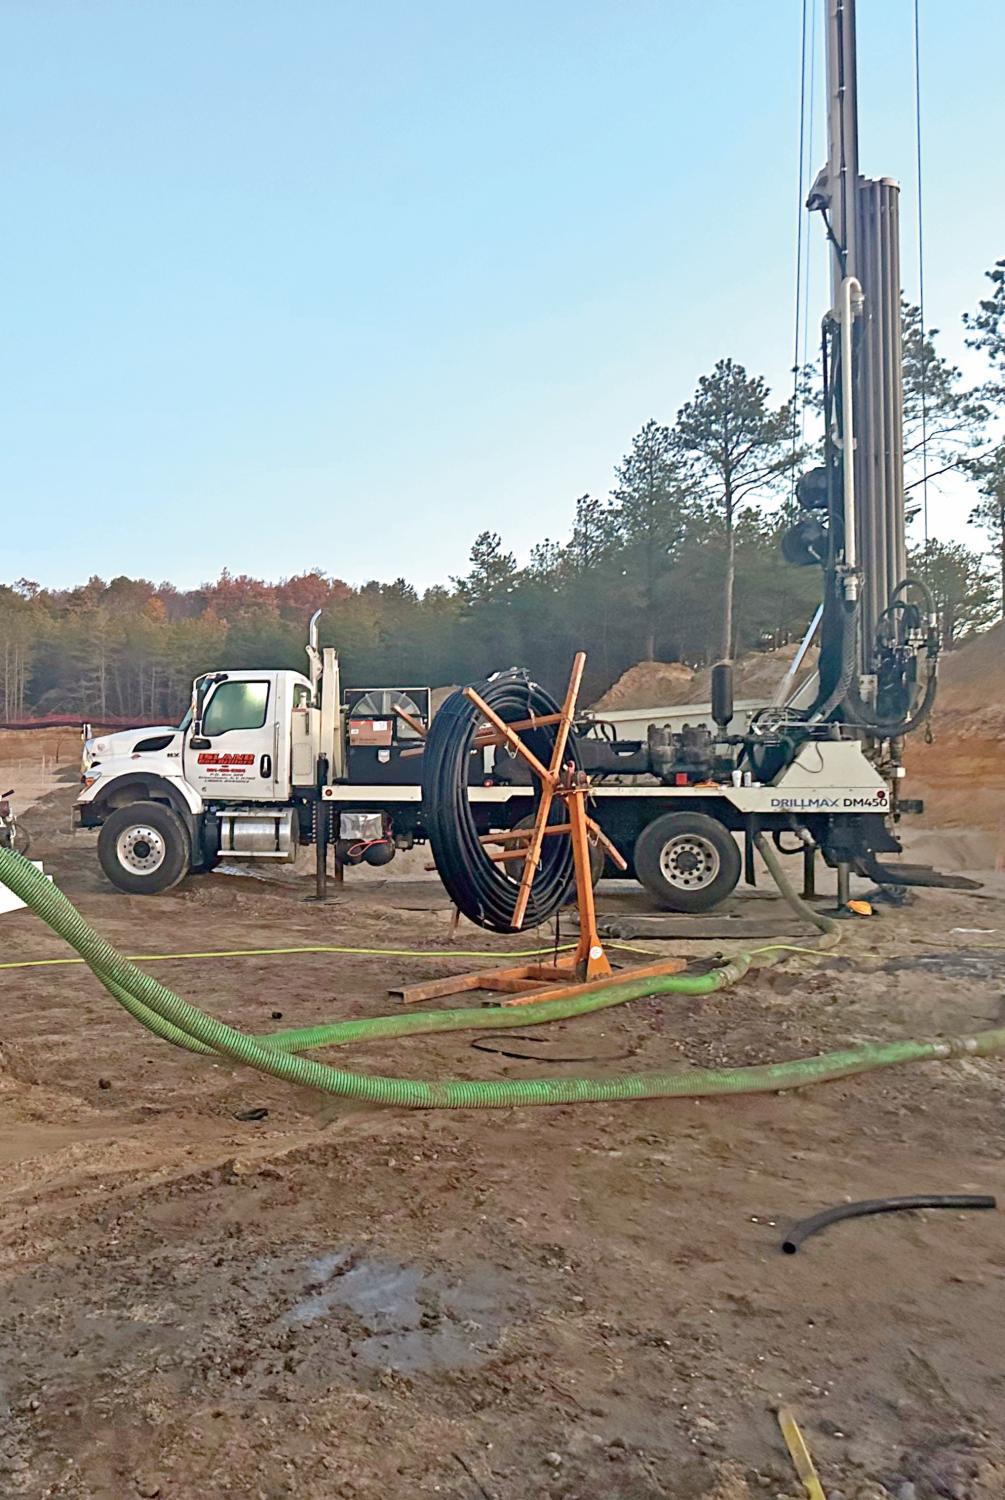 DM450 power and efficiency combines to successfully tackle municipal geothermal projects.